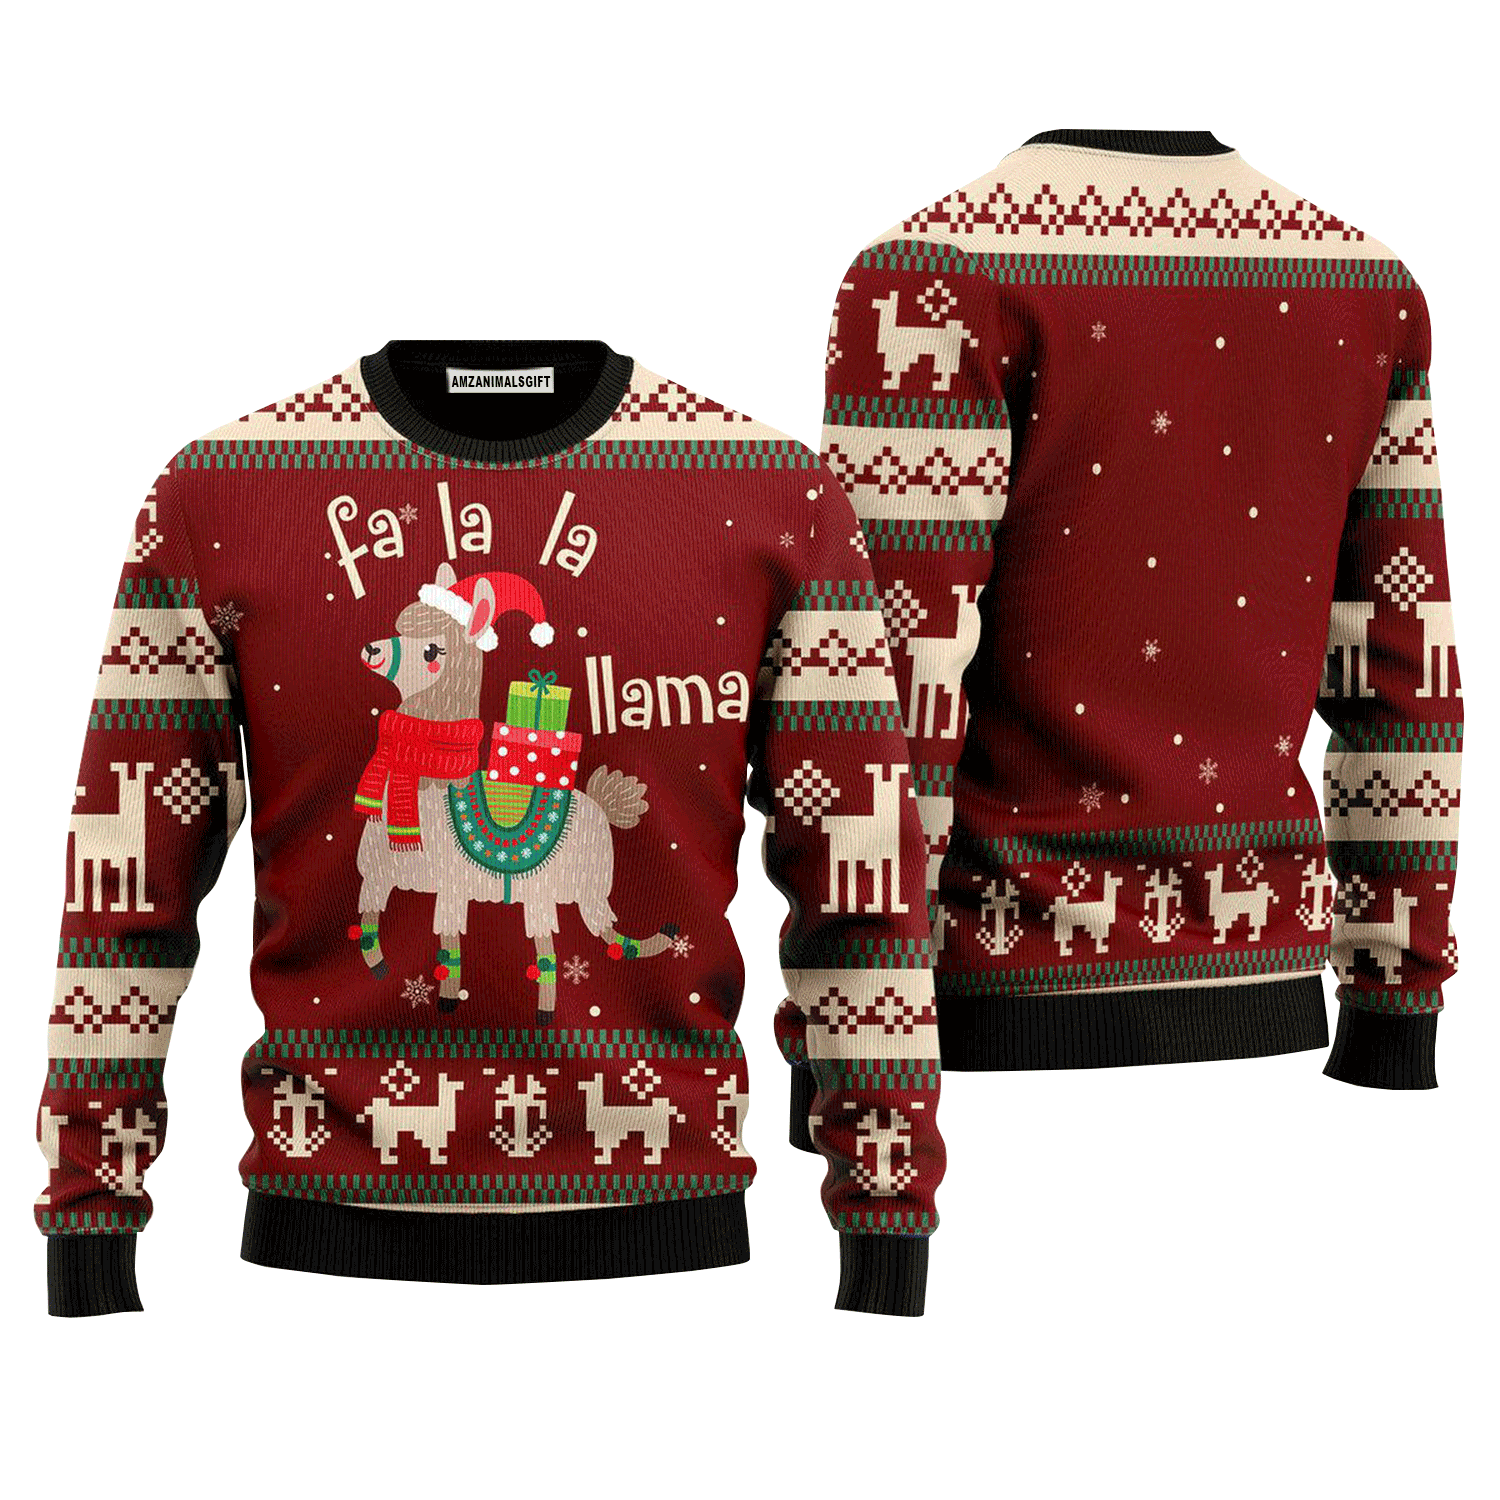 Llama Lalala Sweater Chritmas Pattern, Ugly Sweater For Men & Women, Perfect Outfit For Christmas New Year Autumn Winter